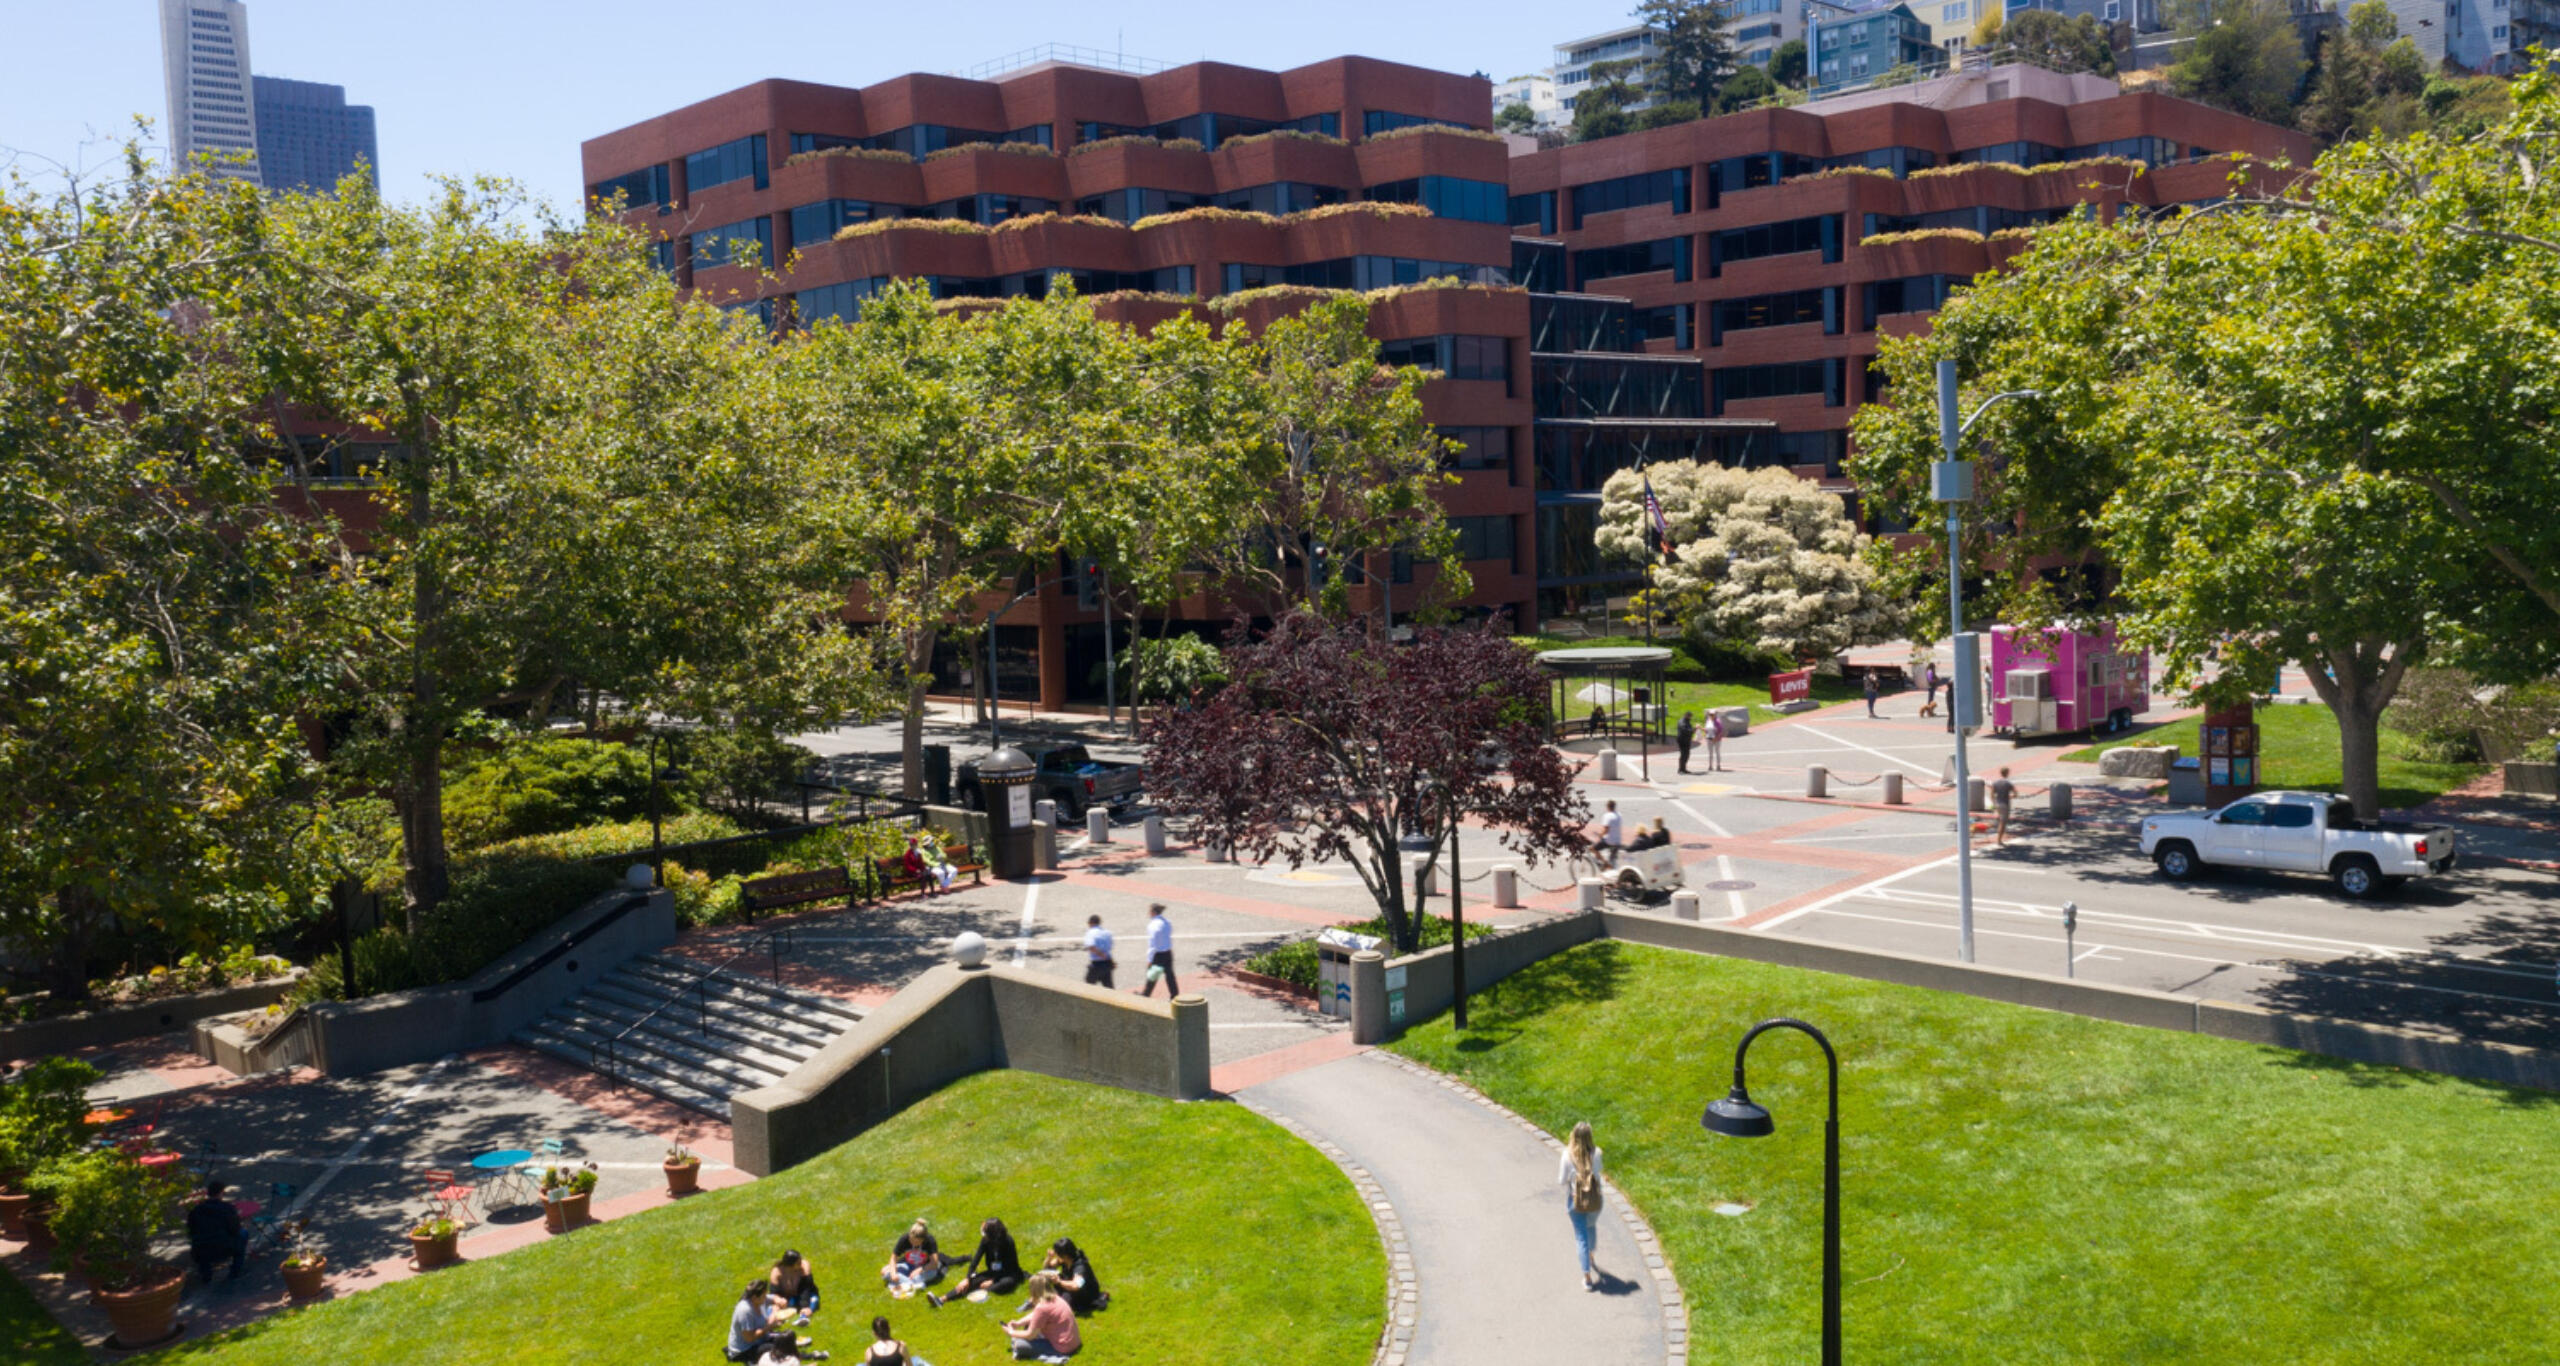 Levi's Plaza exterior with people gathering in greenspace in front of building